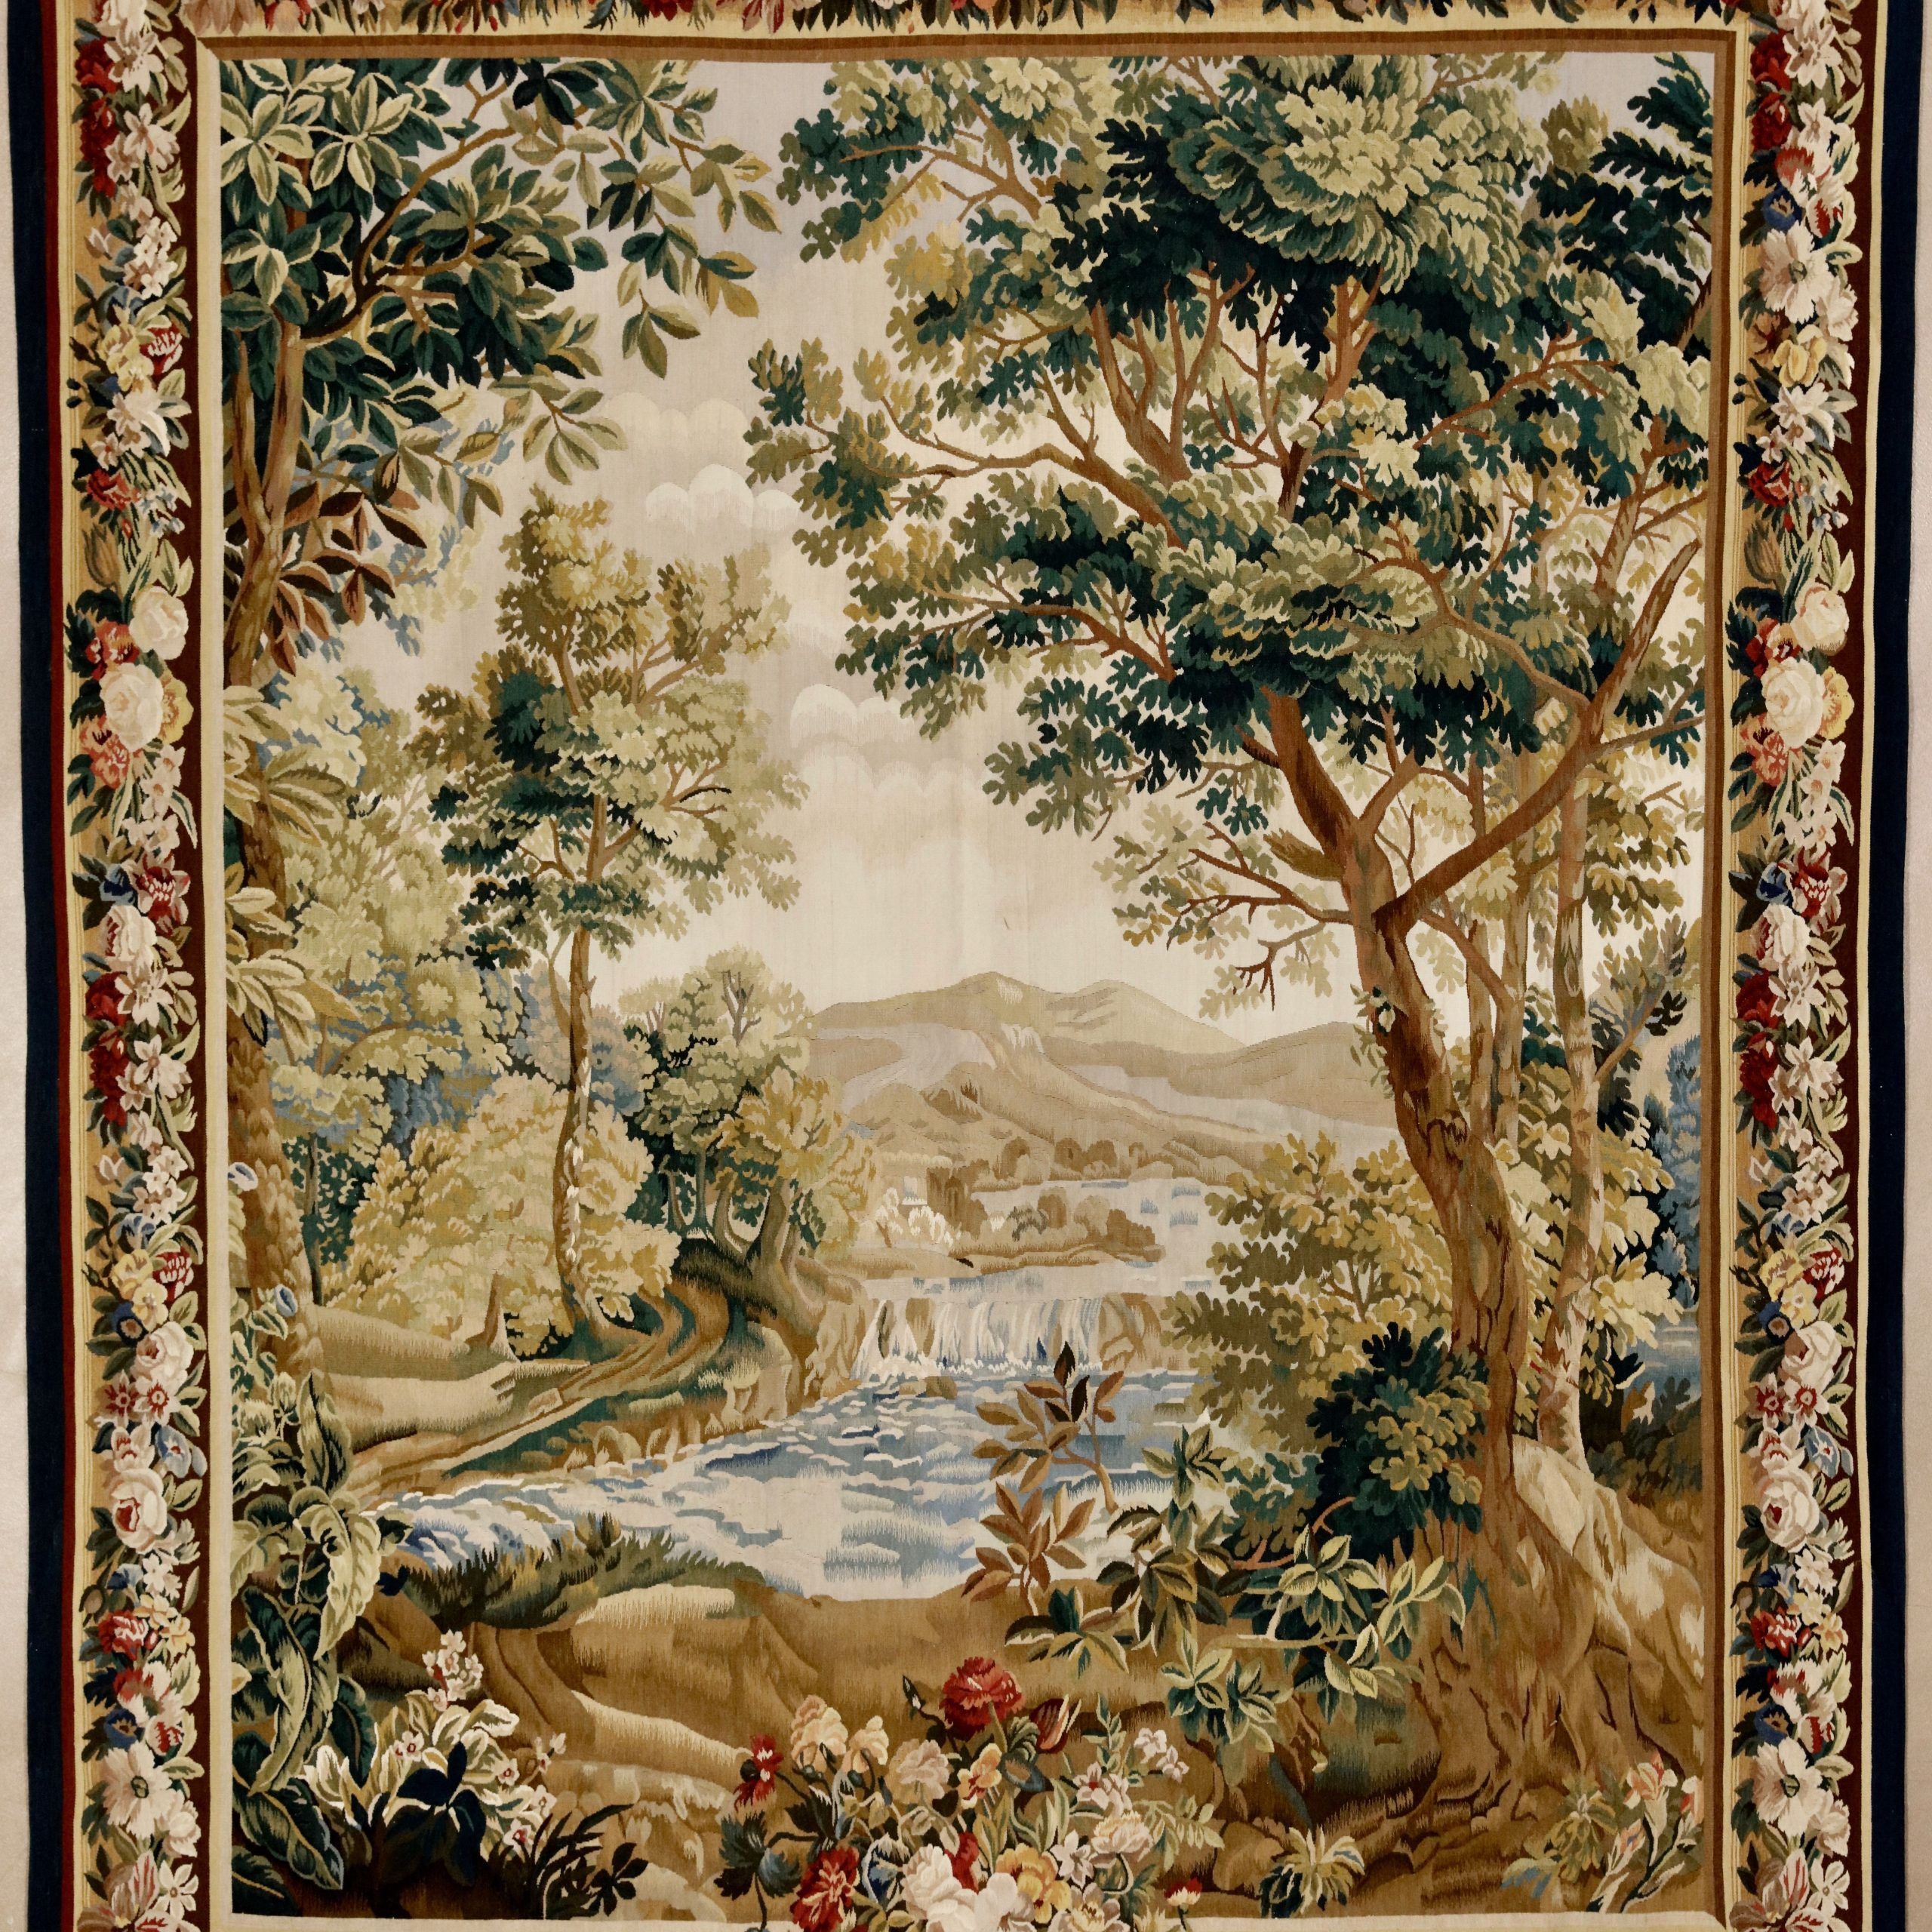 100+ Tapestry Ideas | Tapestry, Art, Medieval Tapestry Intended For Latest Blended Fabric Saint Joseph European Tapestries (Gallery 19 of 20)